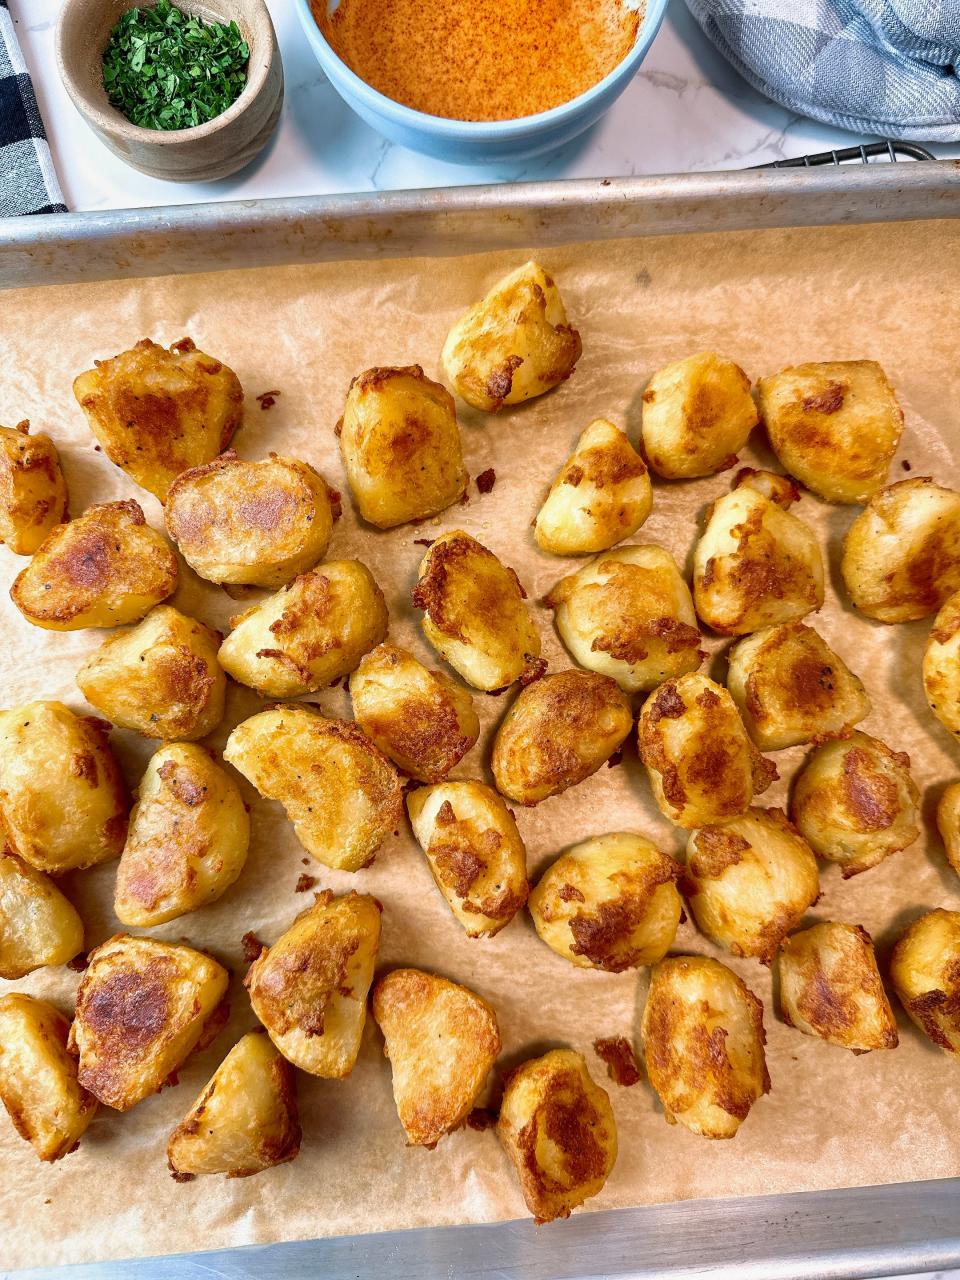 Shake those potatoes here and there for the last 20 minutes of cooking.